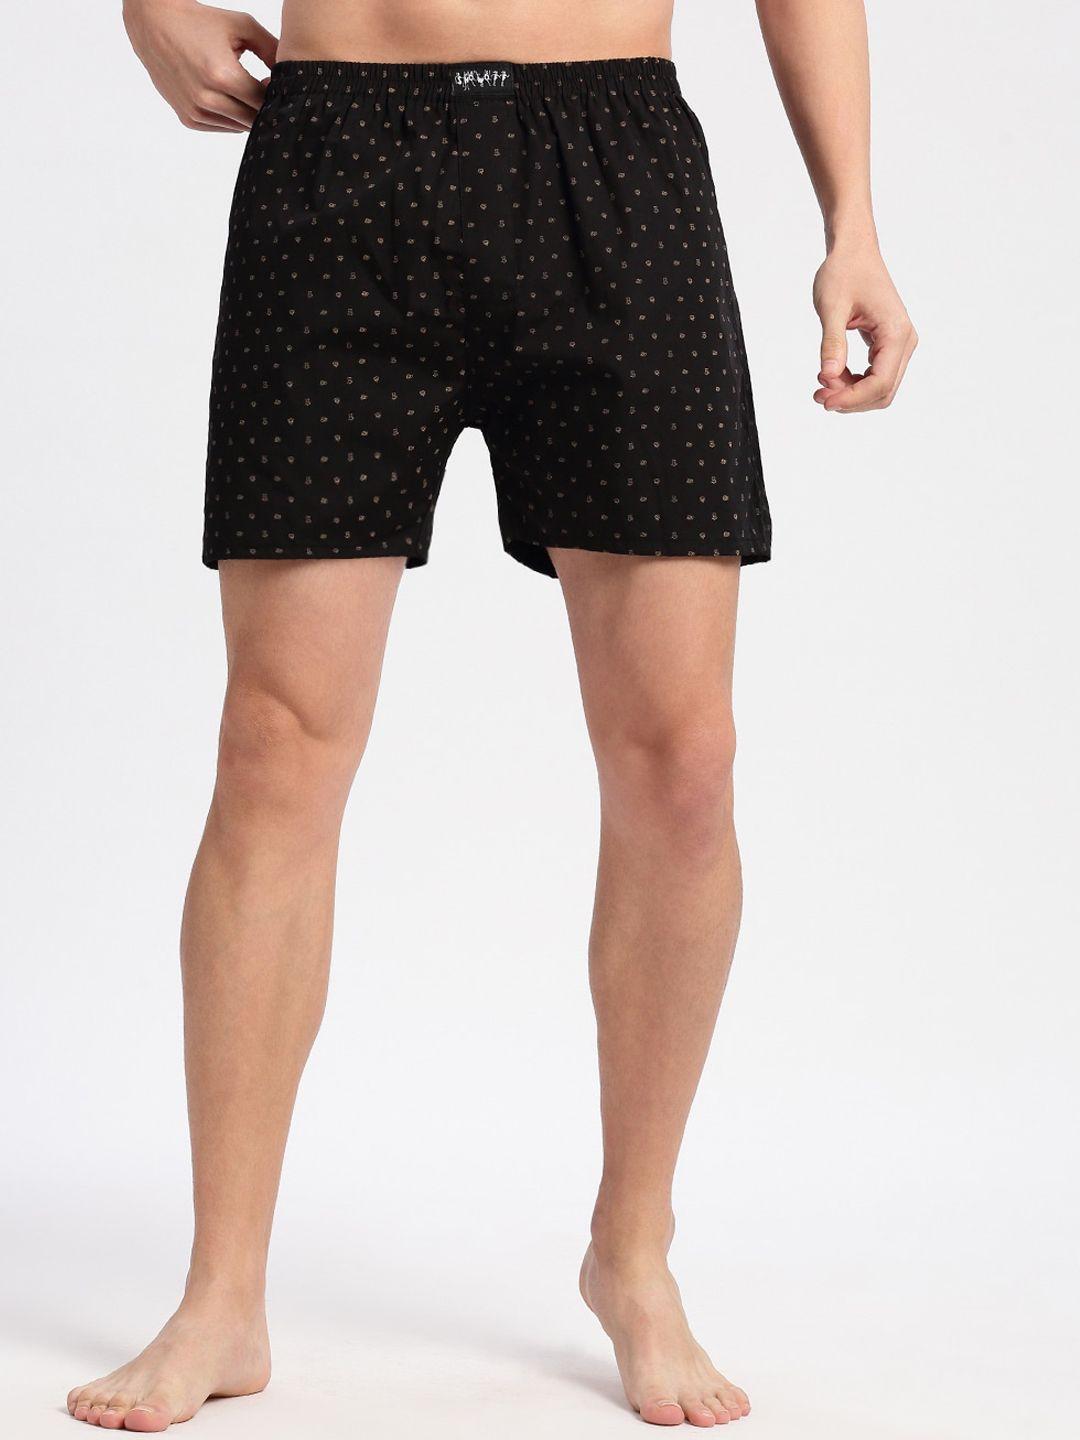 showoff micro-printed cotton boxers am-141-8